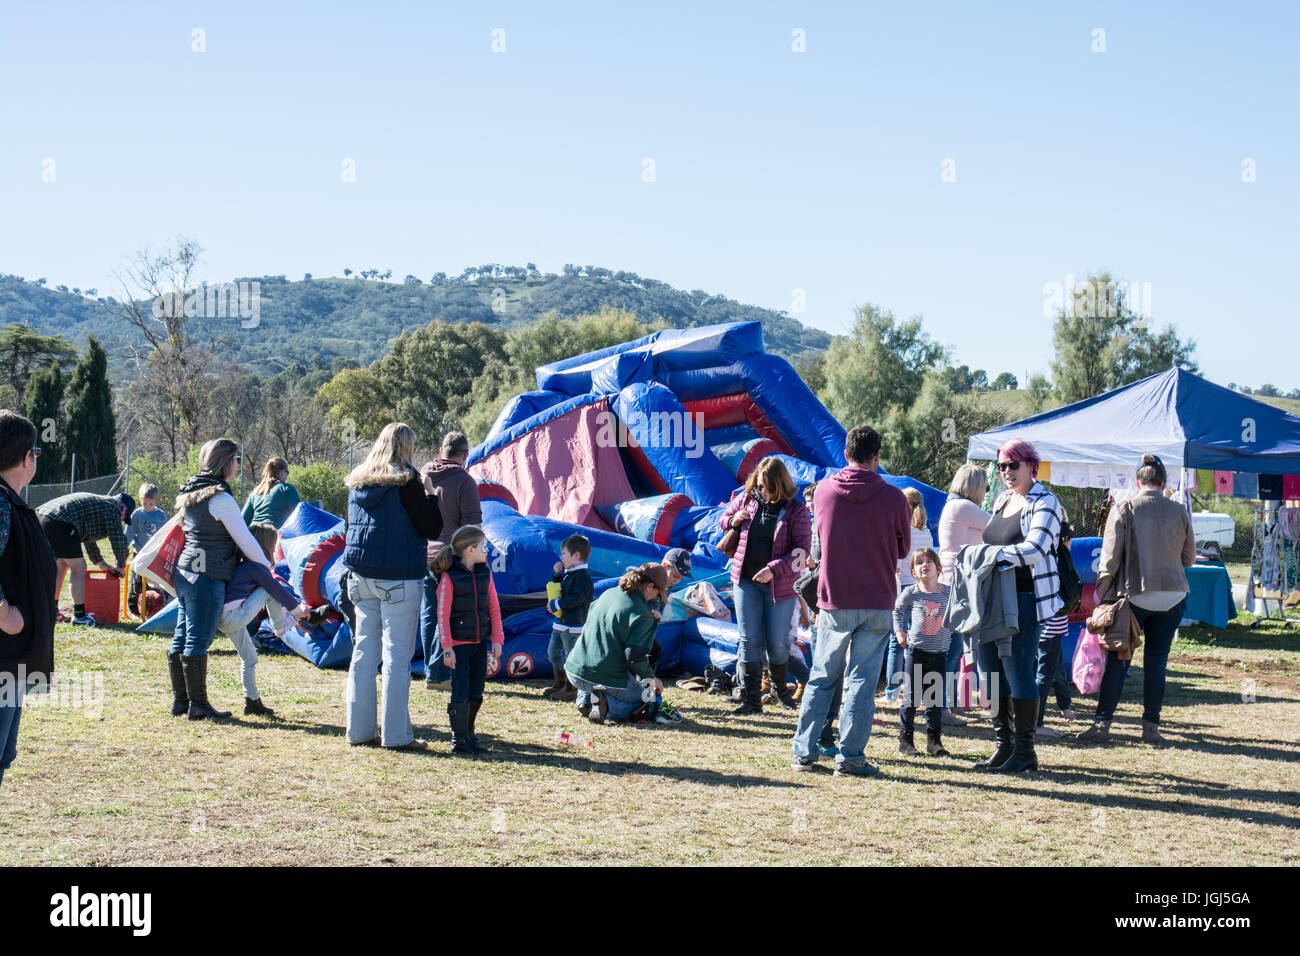 Jumping Castle Collapsed at a country fair NSW Australia.Children and Parents waiting for repair. Stock Photo